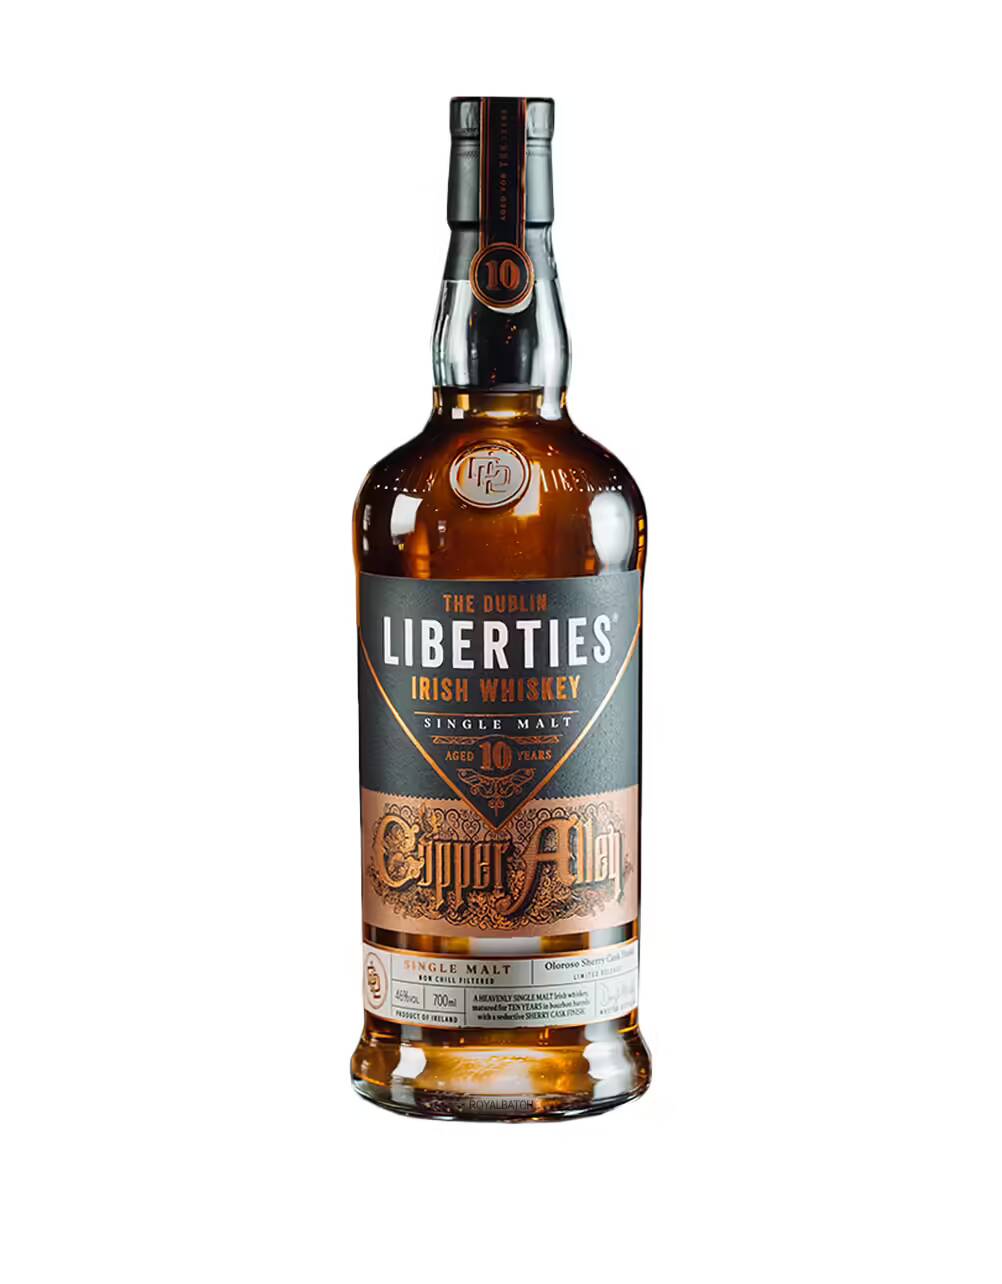 The Dublin Liberties Copper Alley 10 Year Old Irish Whiskey 